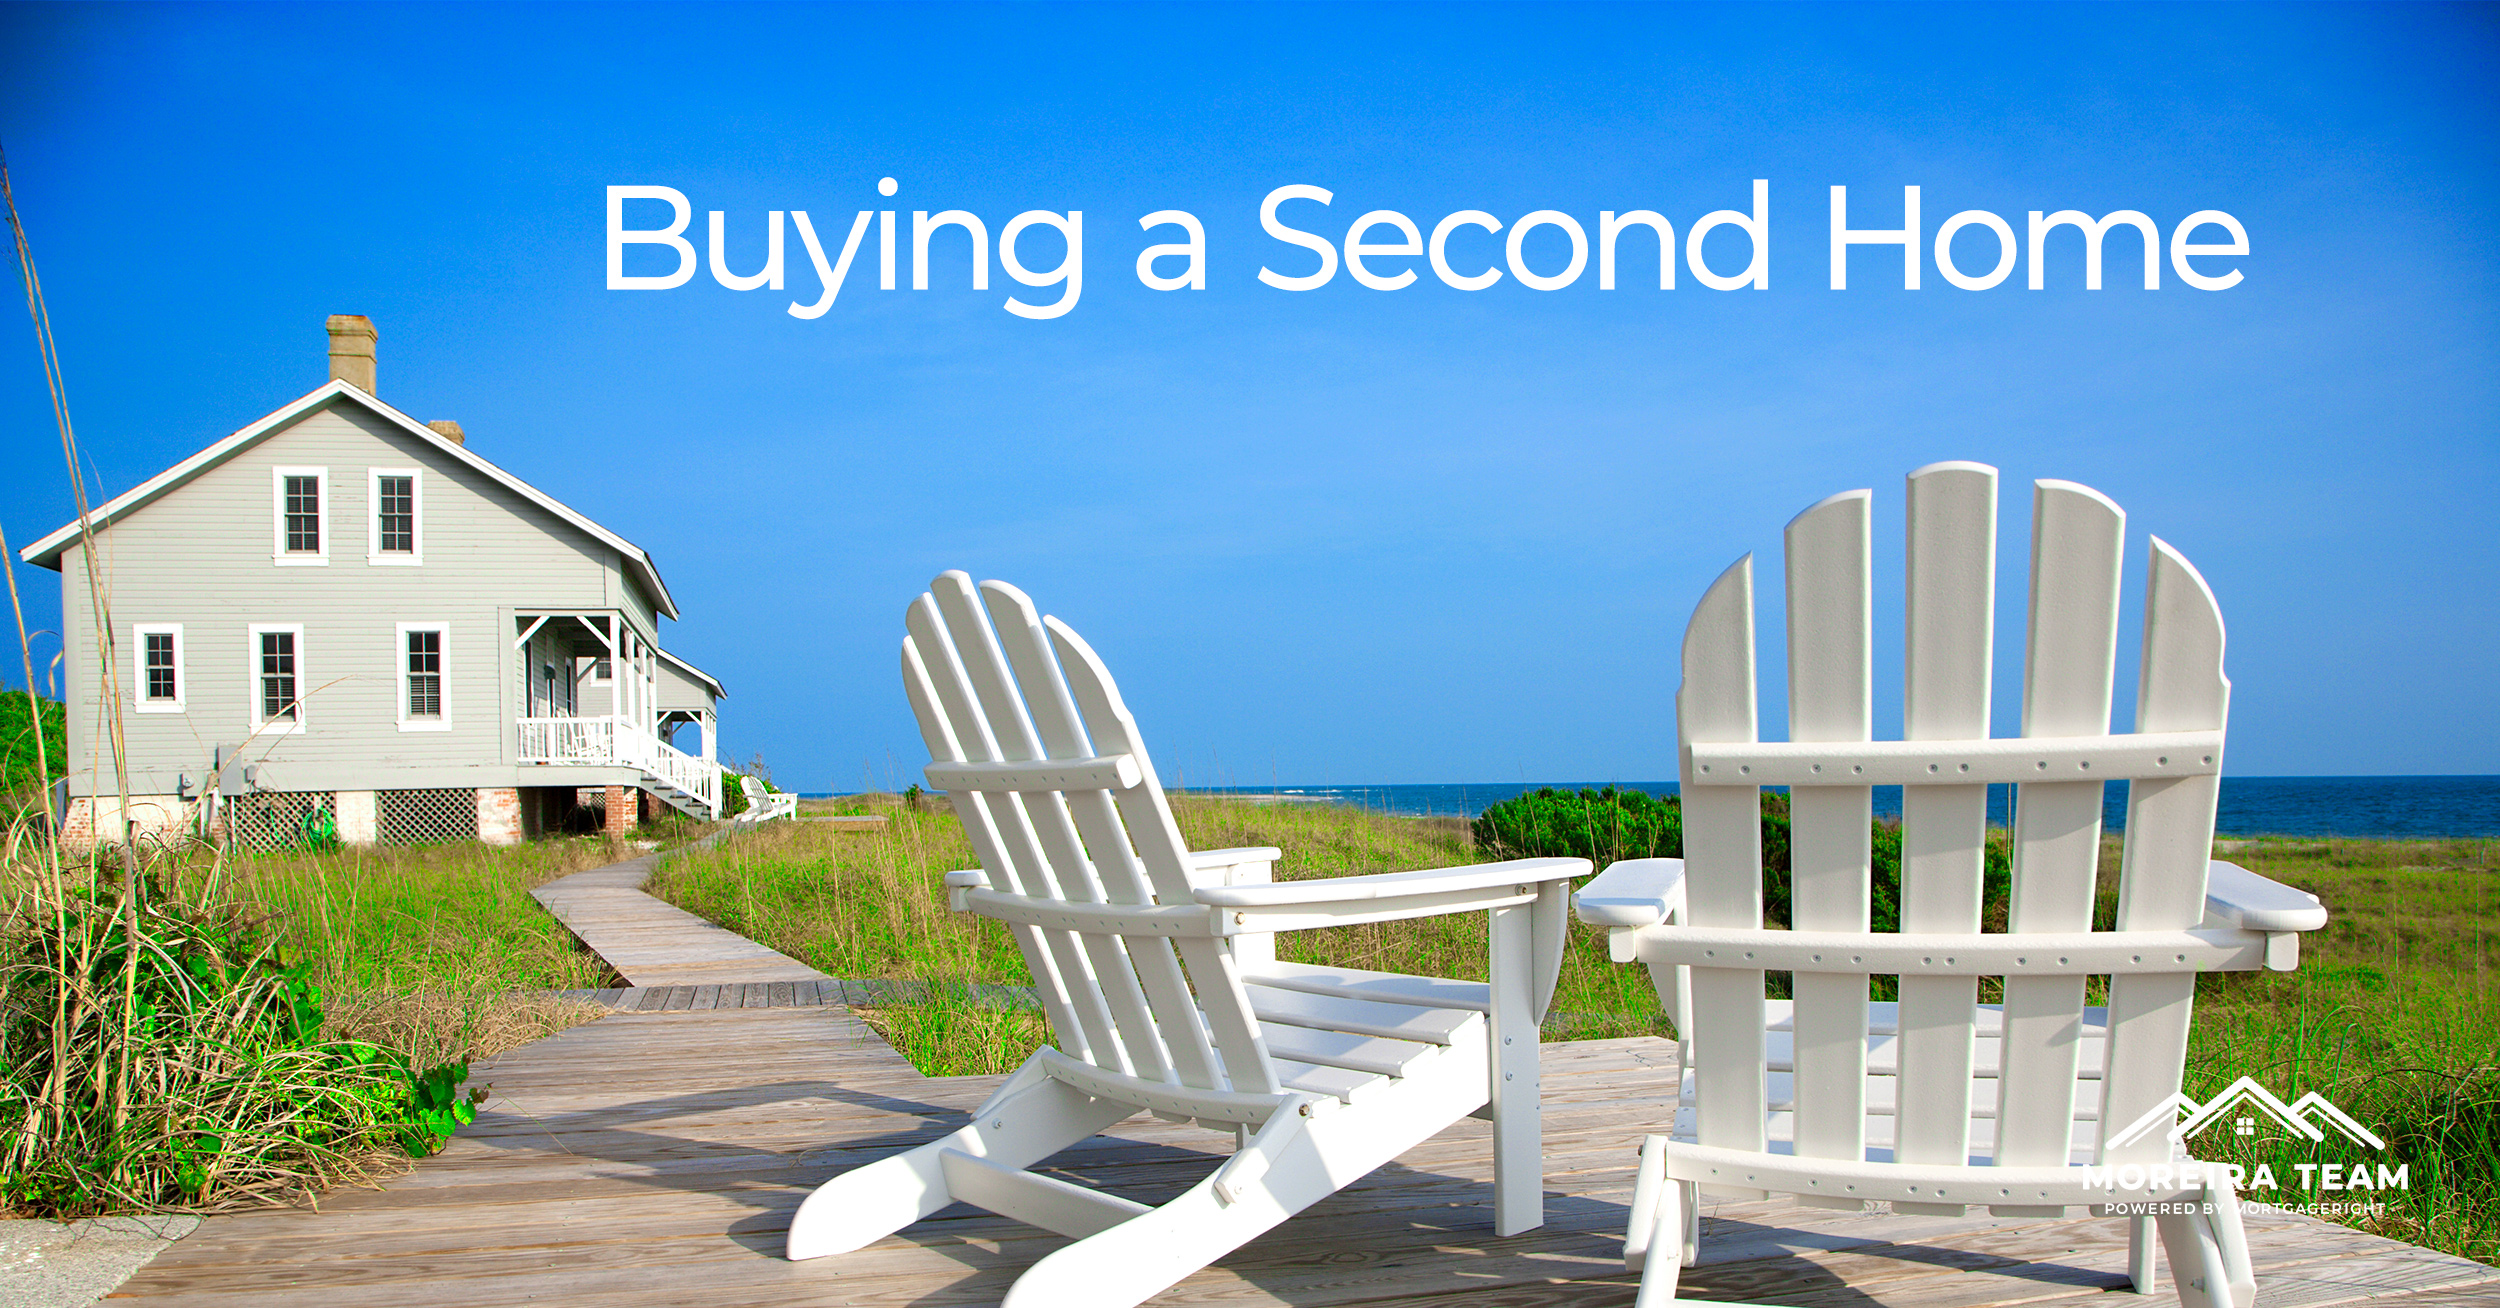 How to Buy a Second Home – Your Top Considerations